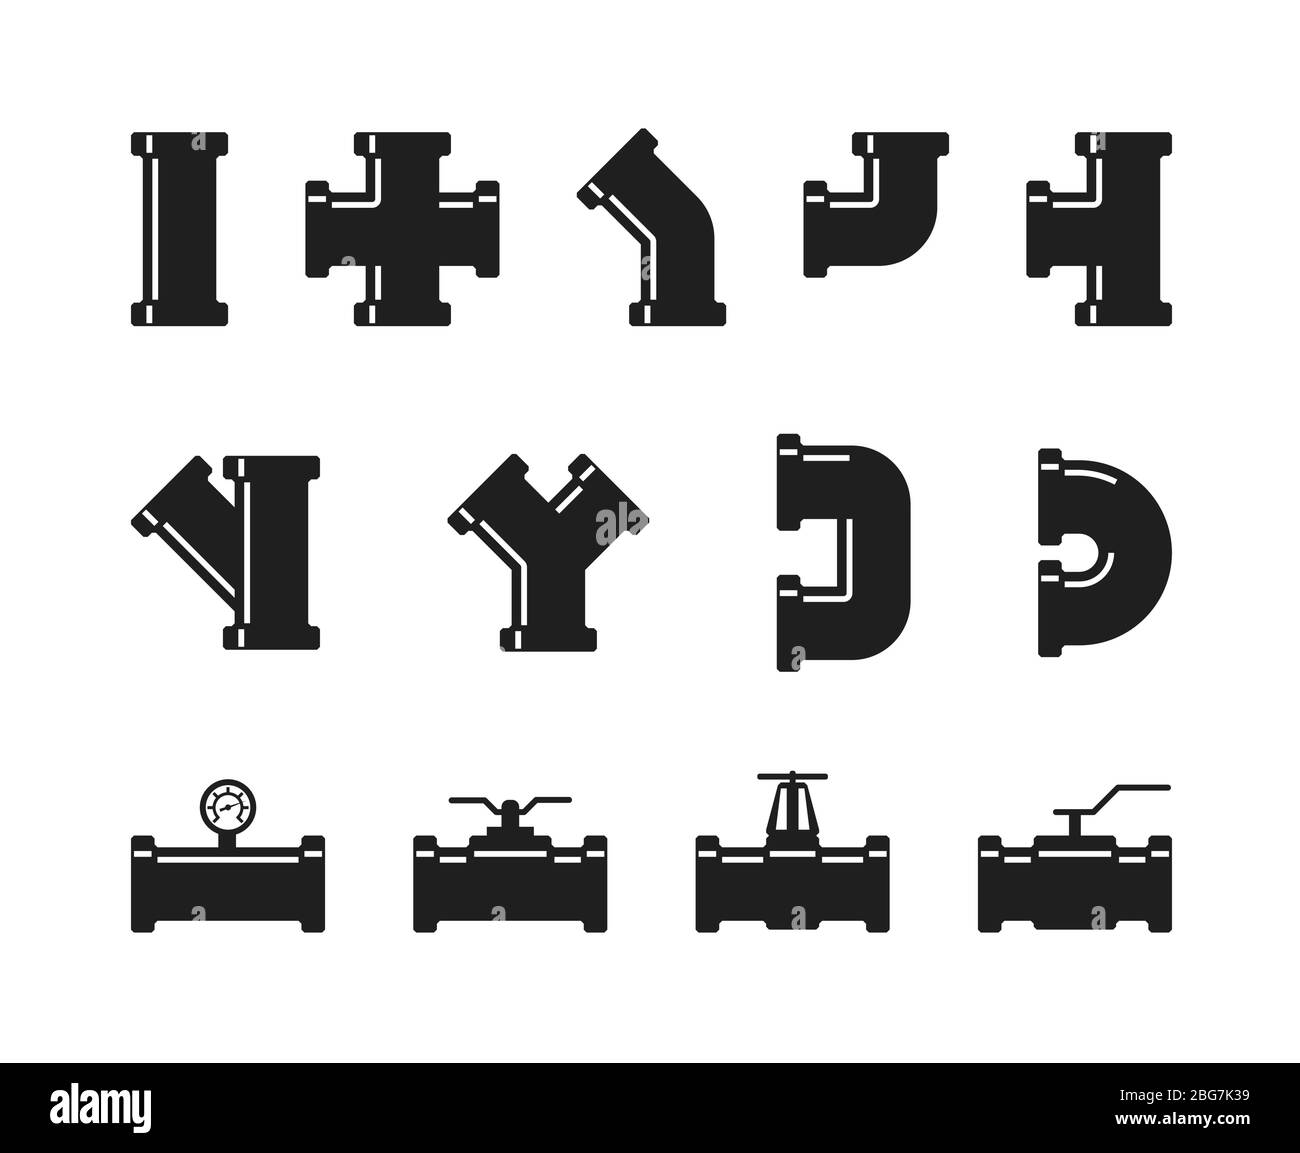 Pipe fittings, water tubes icons. Plumbing, construction pipeline, industrial drainage system vector set isolated. Illustration of tube and pipe indus Stock Vector